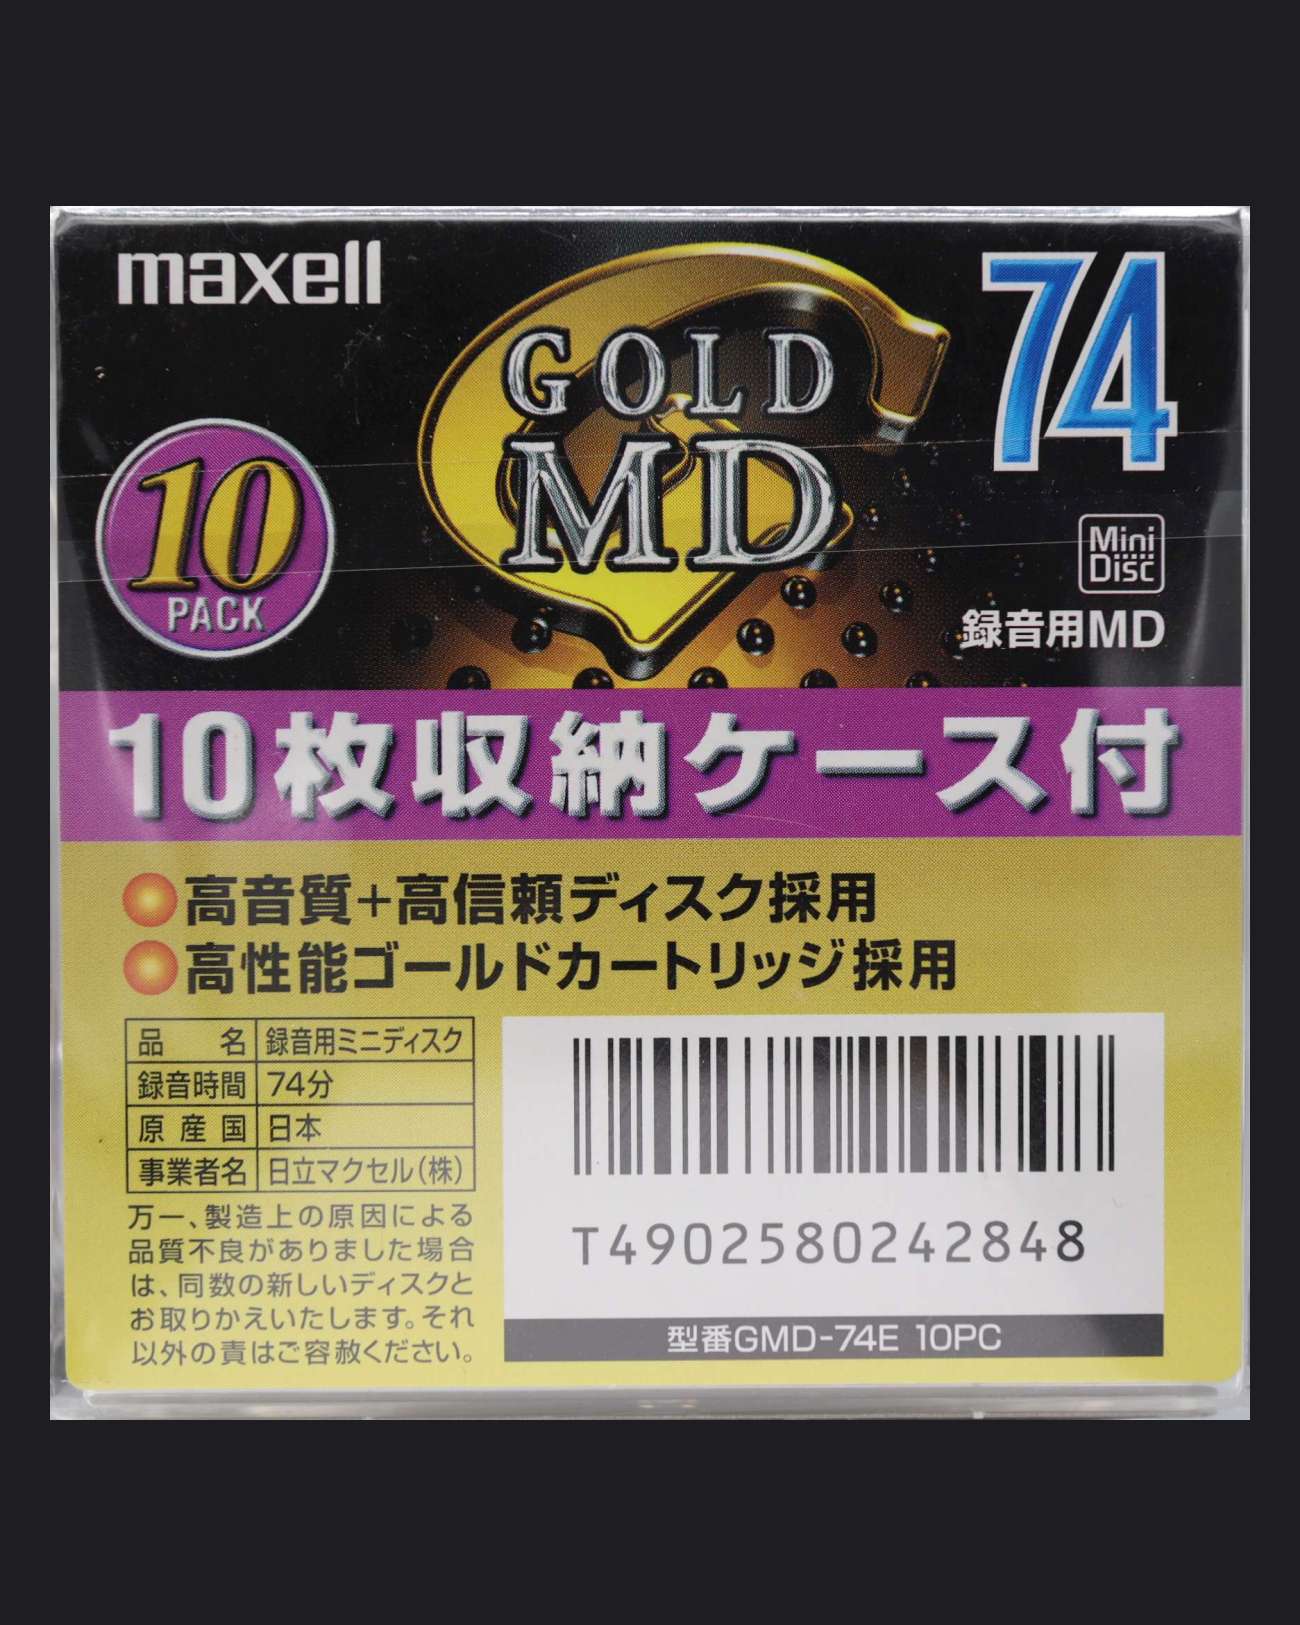 Maxell Gold MD GMD